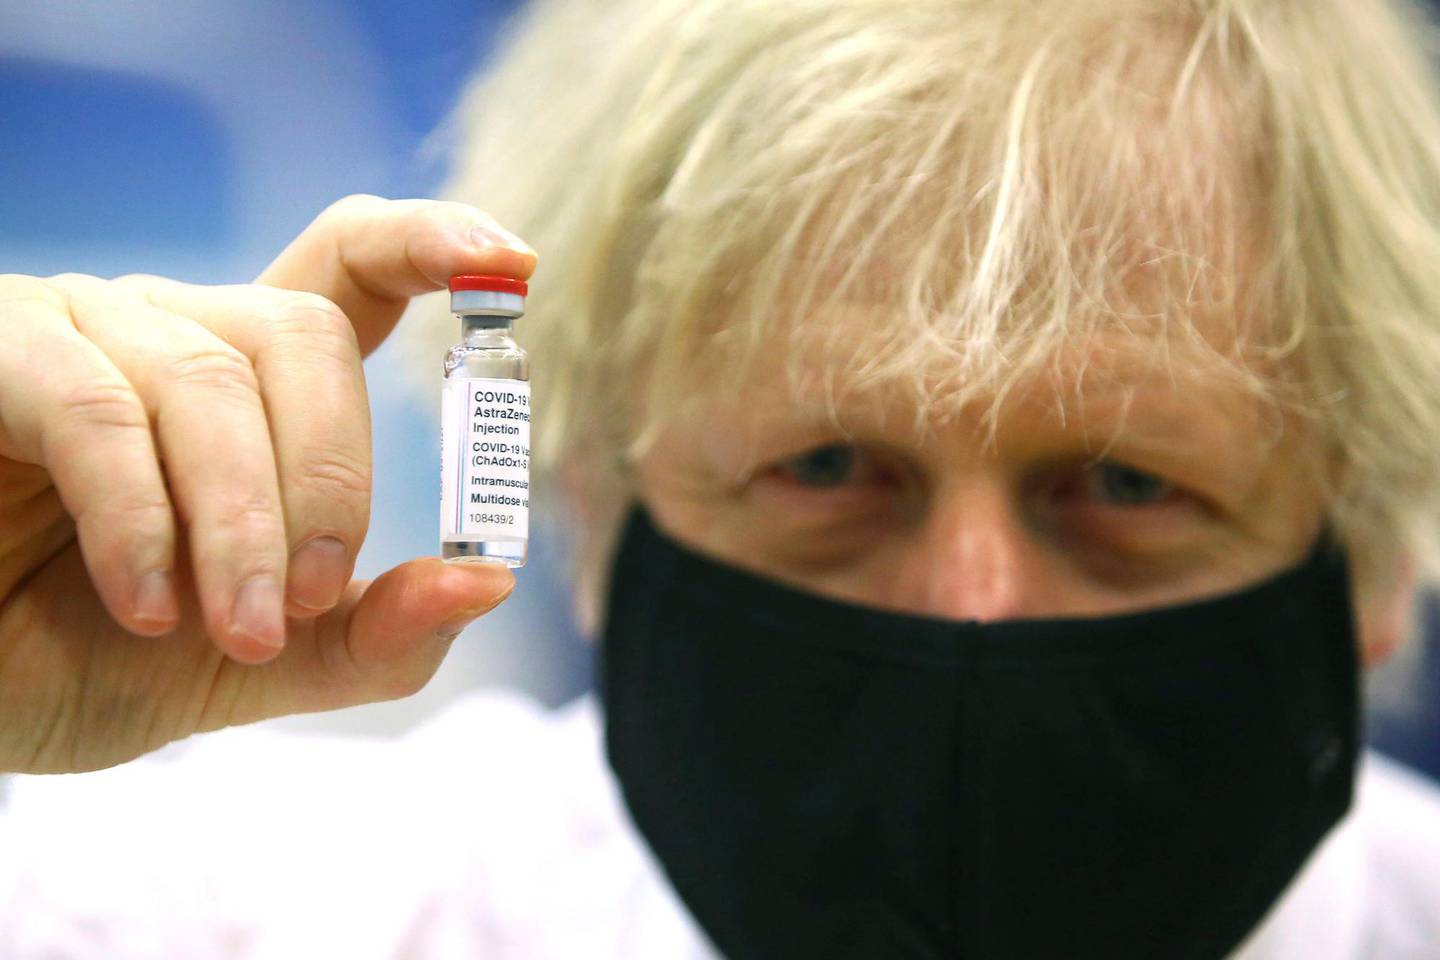 FILE - In this Wednesday, Feb. 17, 2021 file photo, Britain's Prime Minister Boris Johnson holds a vial of the Oxford/Astra Zeneca Covid-19 vaccine at a vaccination centre in Cwmbran, south Wales. The British government says it aims to give every adult in the country a first dose of coronavirus vaccine by July 31, a month earlier than its previous target. In addition, the goal is for everyone over 50 or with an underlying health condition to get a shot by April 15, rather than the previous target of May 1.  (Geoff Caddick/Pool via AP, File)